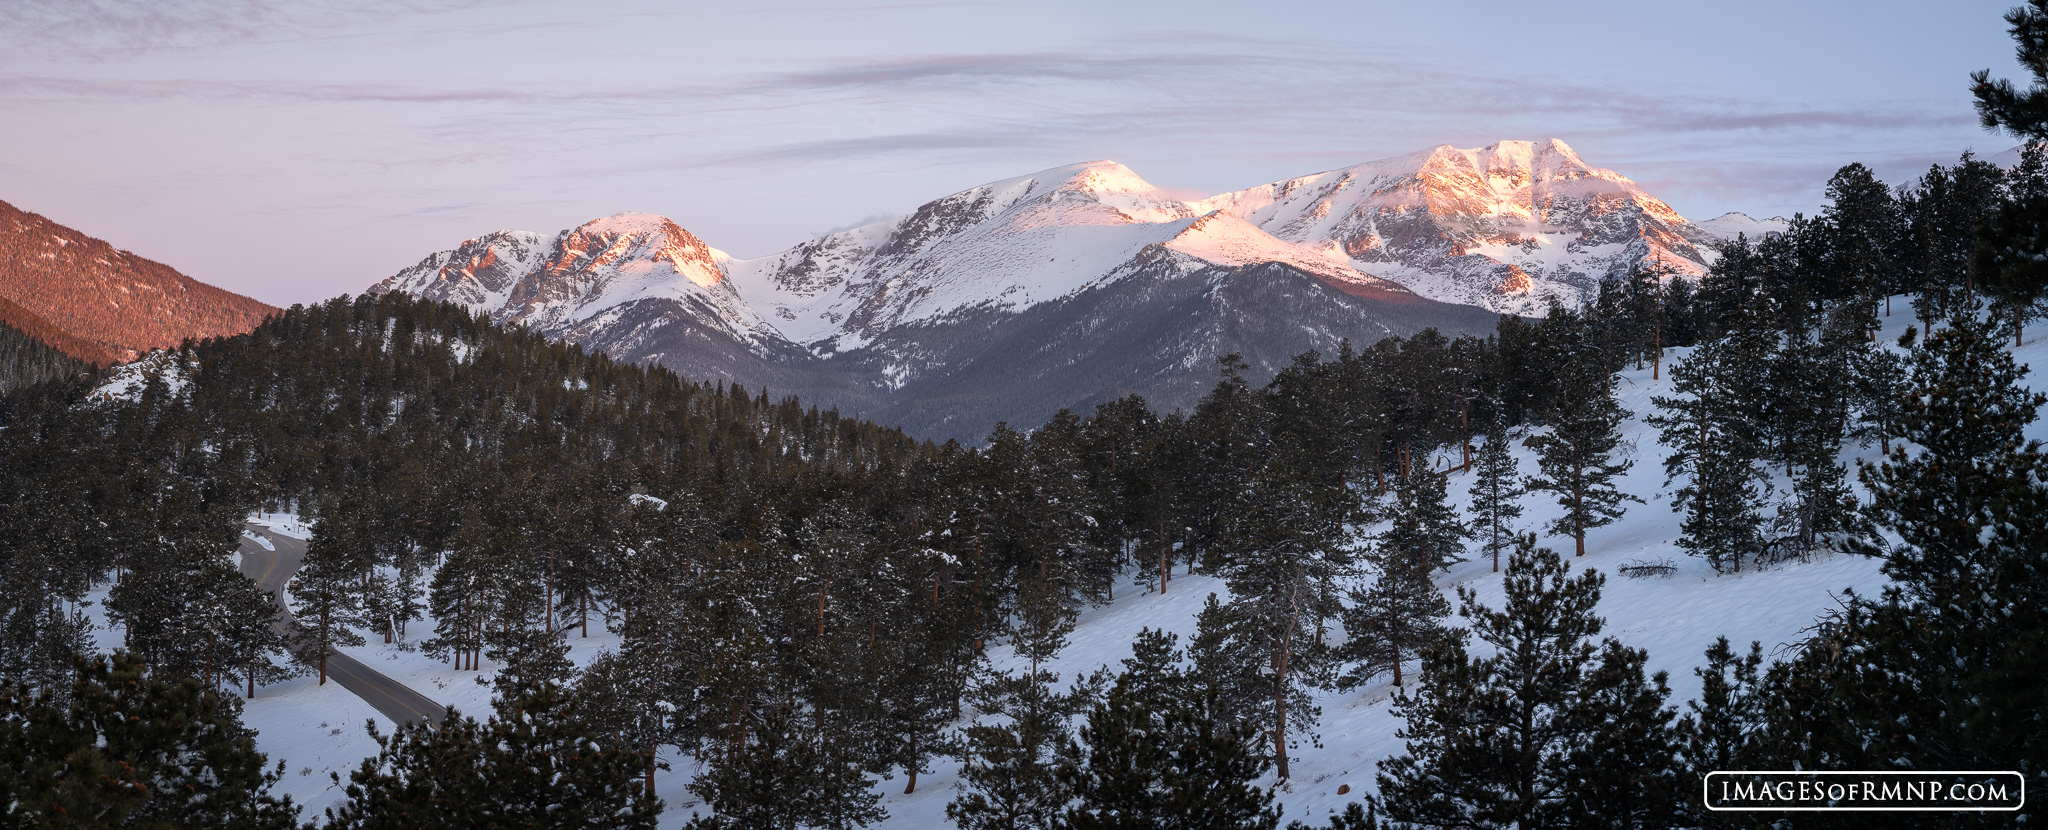 Chapin, Chiquita, and Ypsilon Mountains awaken to the warm light of a new day. Though it is March, snow hangs heavy on the peaks...